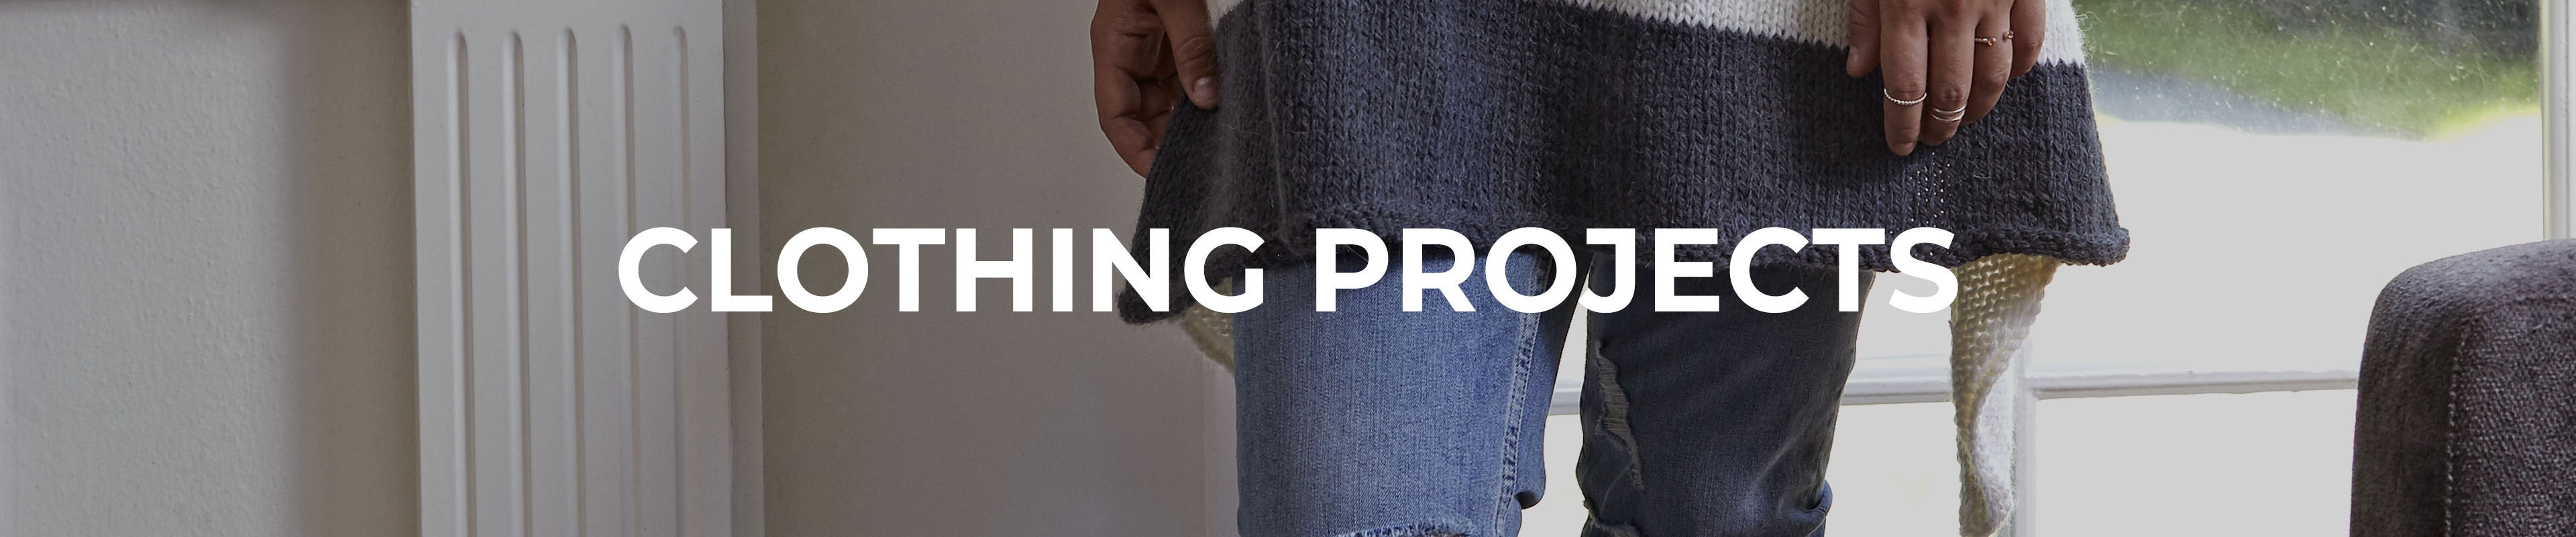 Clothing Projects